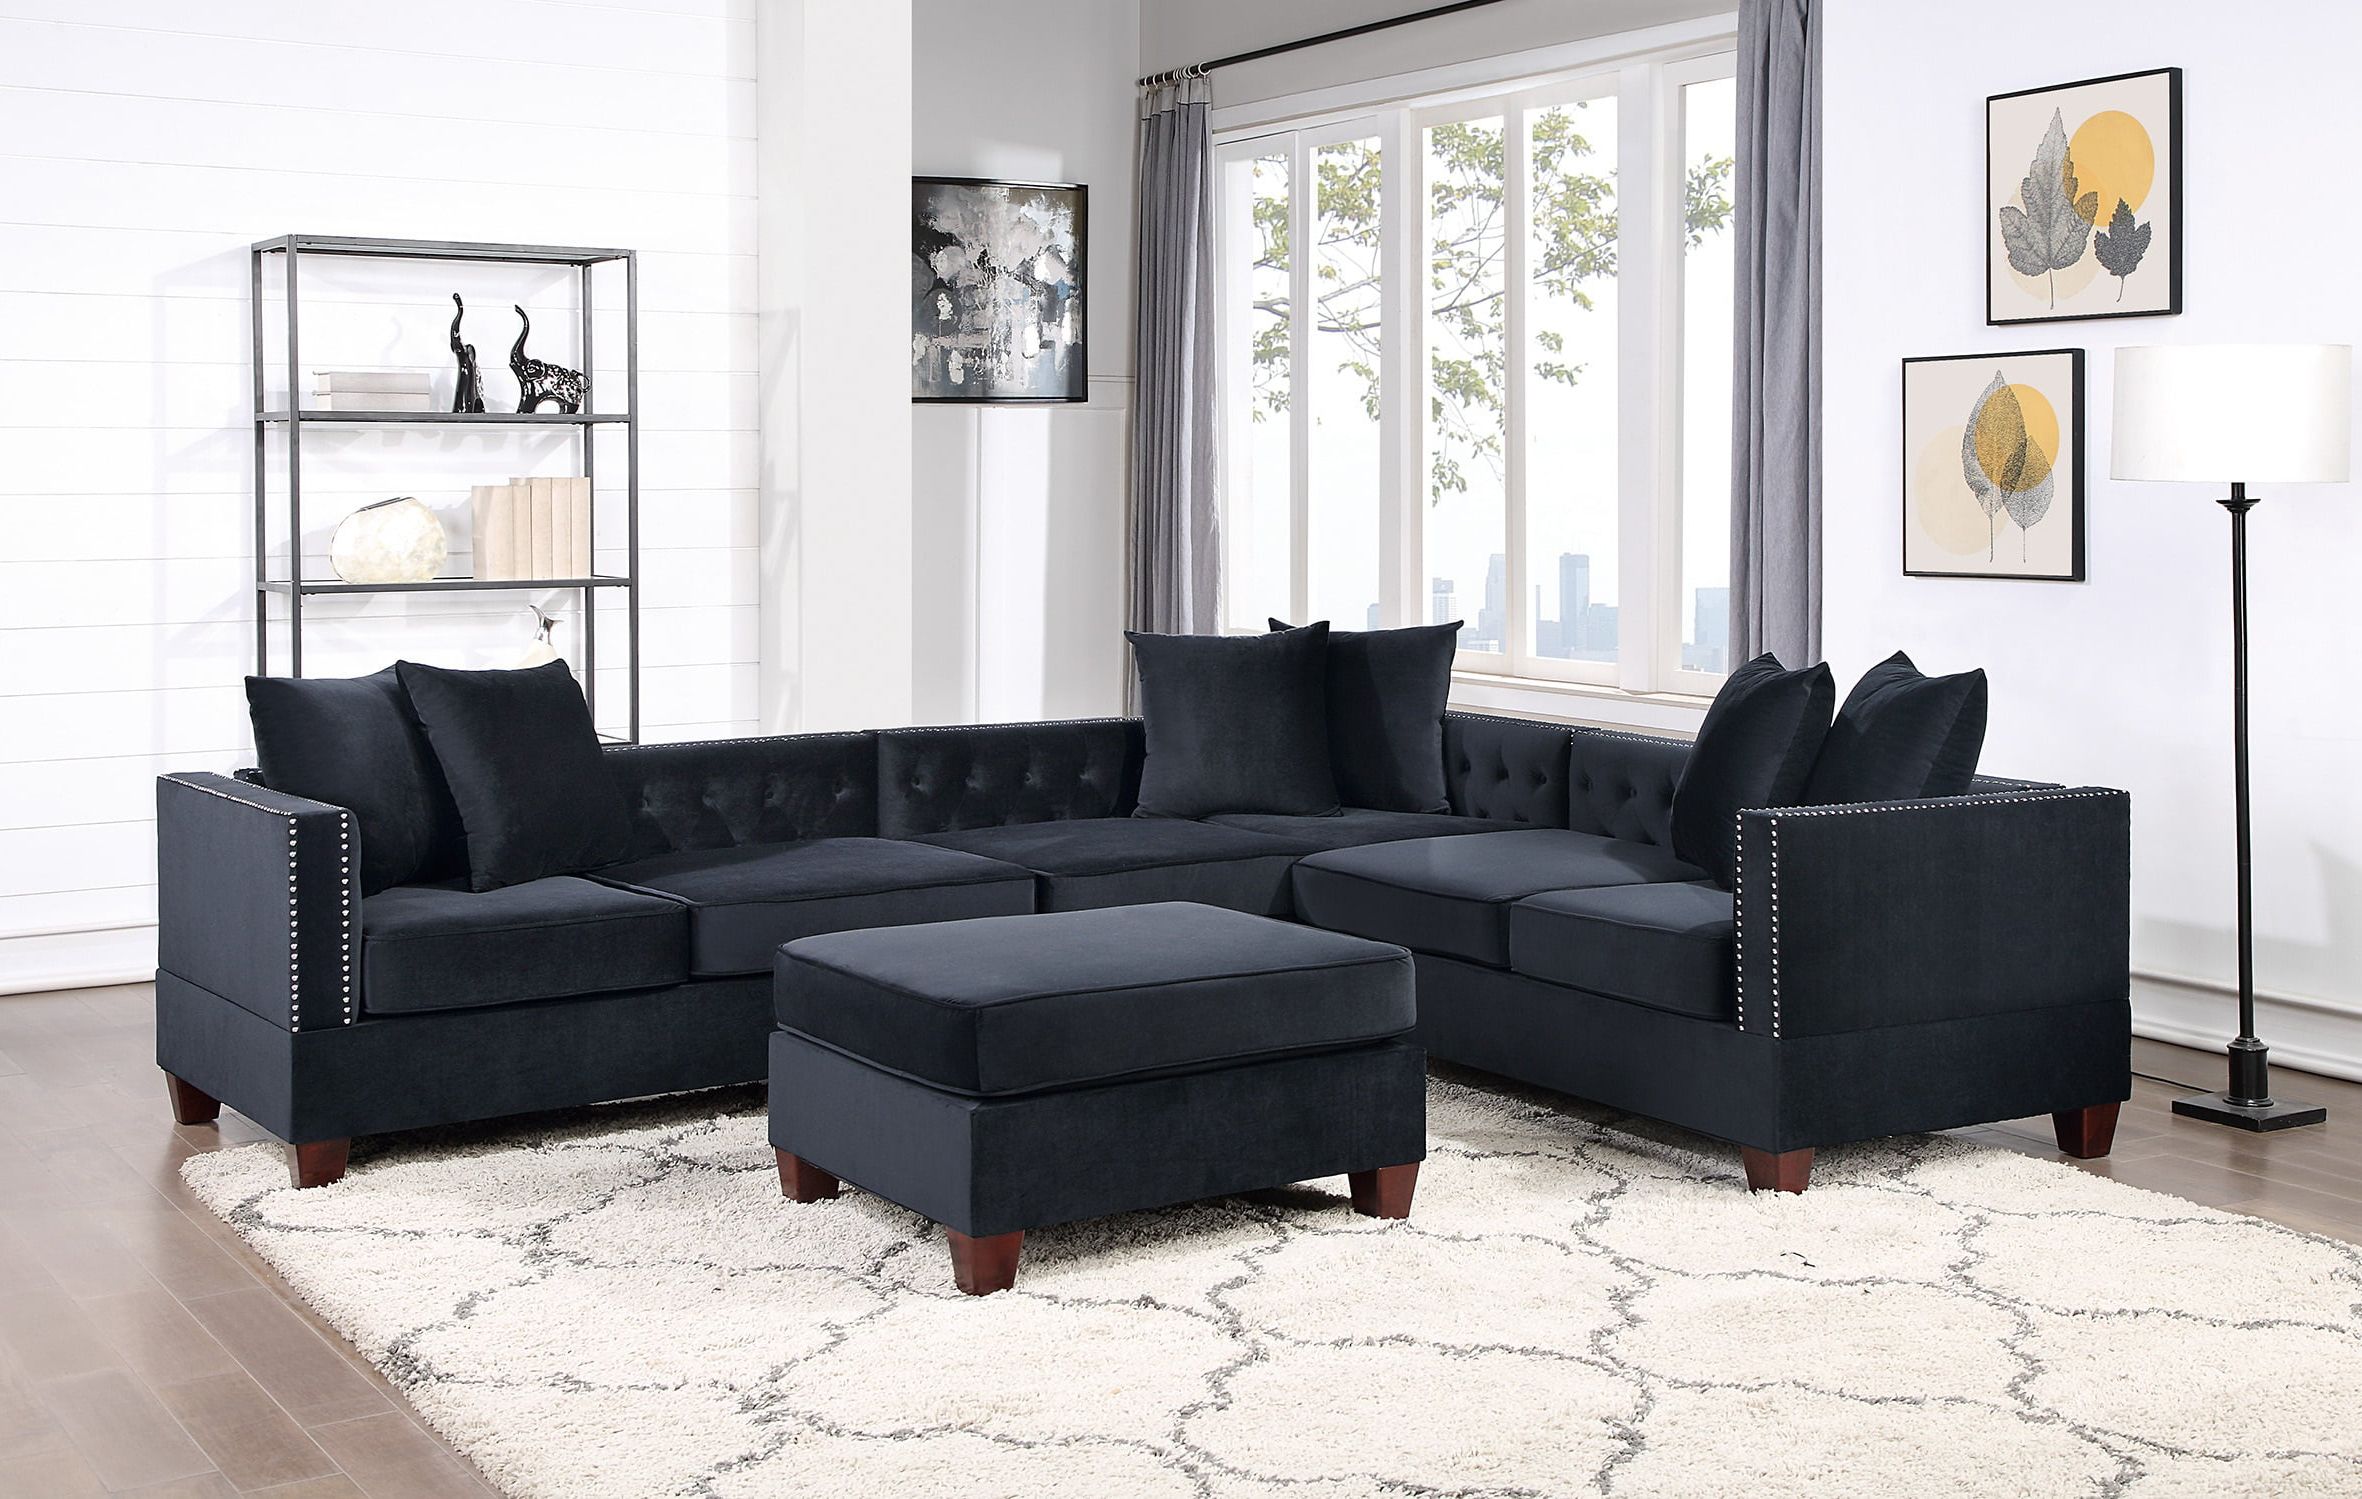 Black Velvet Fabric Solidwood Sectional 4pc Set Reversible Chaise /  Loveseats Ottoman Tufted Cushion Couch Pillows Living Room – Walmart For Sectional Sofas With Ottomans And Tufted Back Cushion (View 3 of 20)